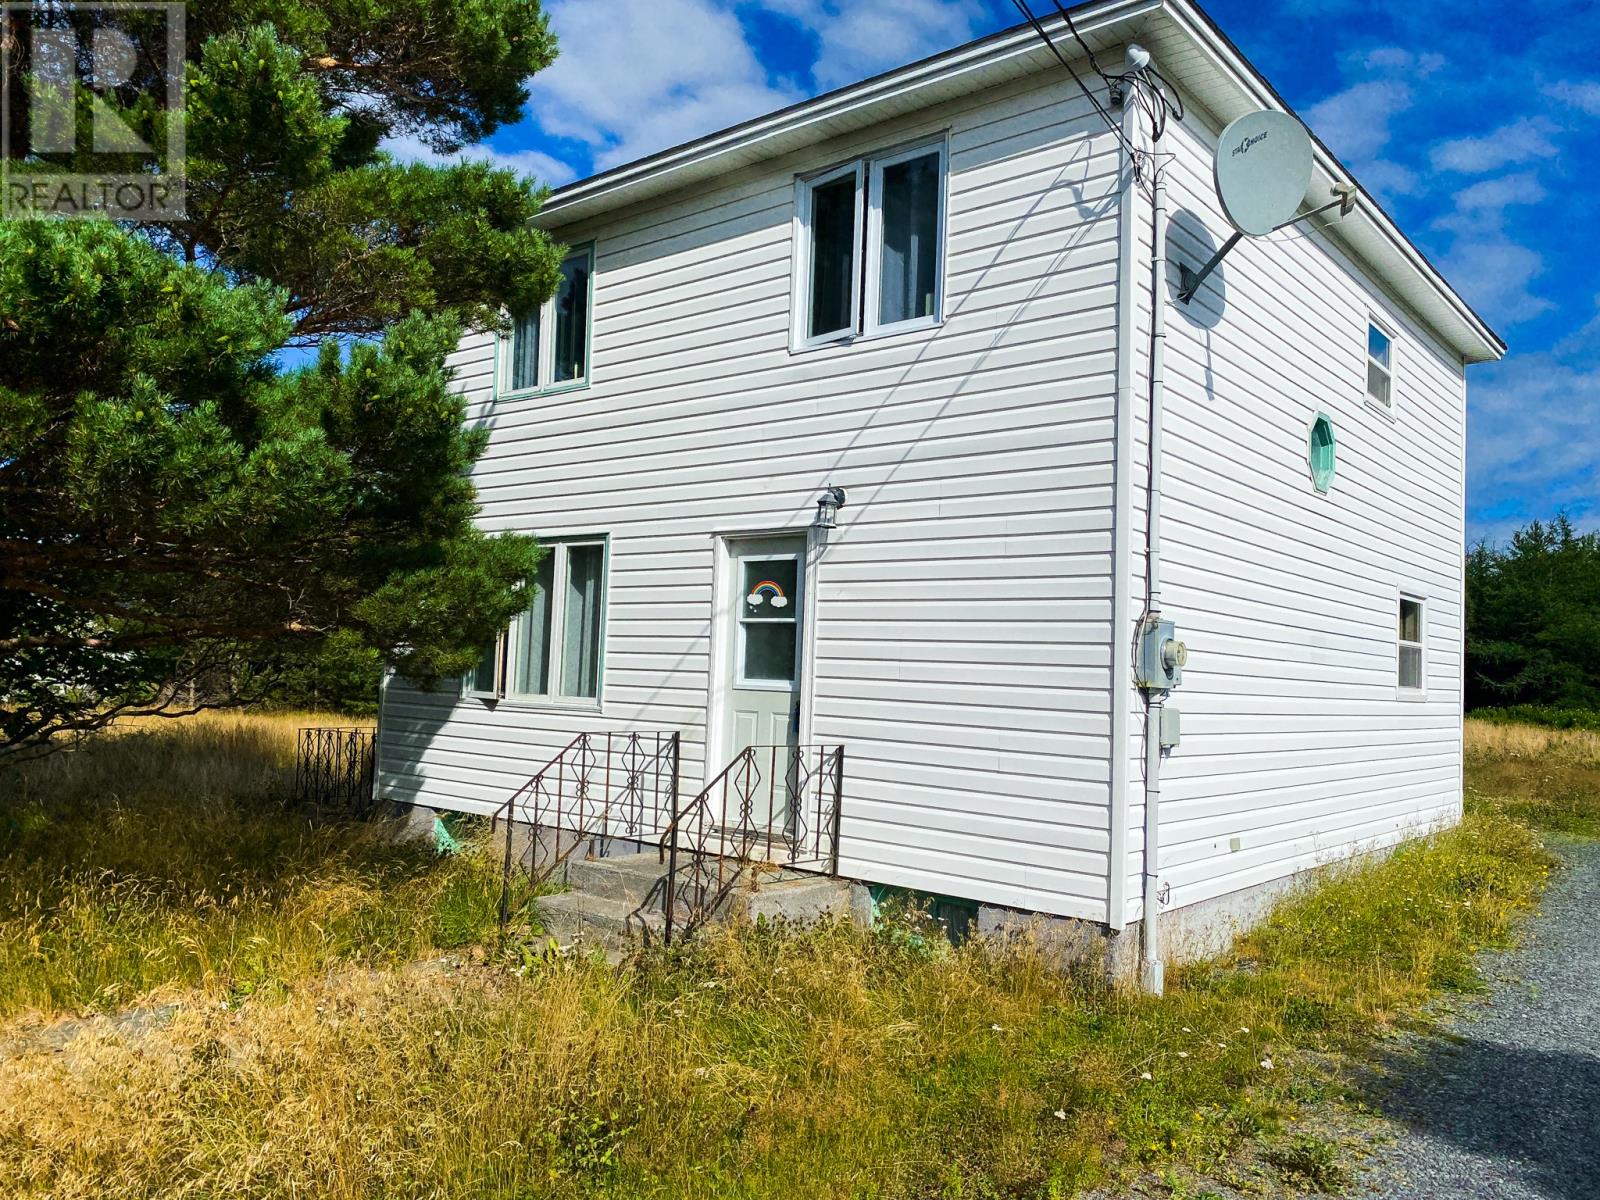 29-33 Springfield Road located in South River, Newfoundland and Labrador